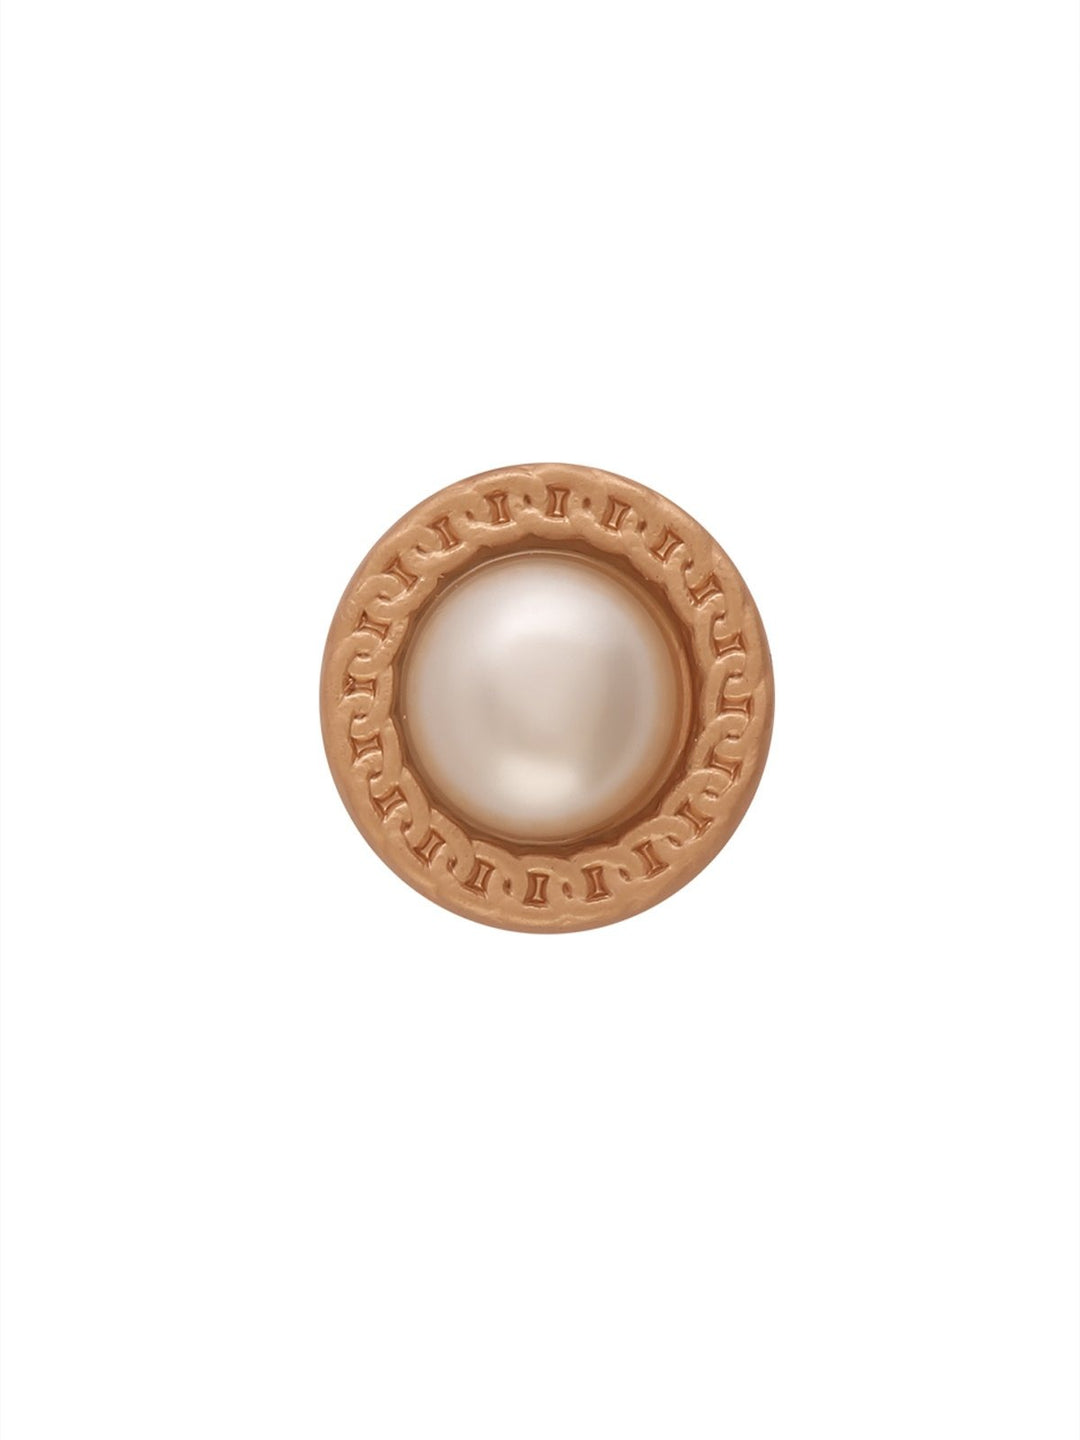 Shiny Round Shape with Chain-Like Design Rim Pearl Button in Matte Gold Color